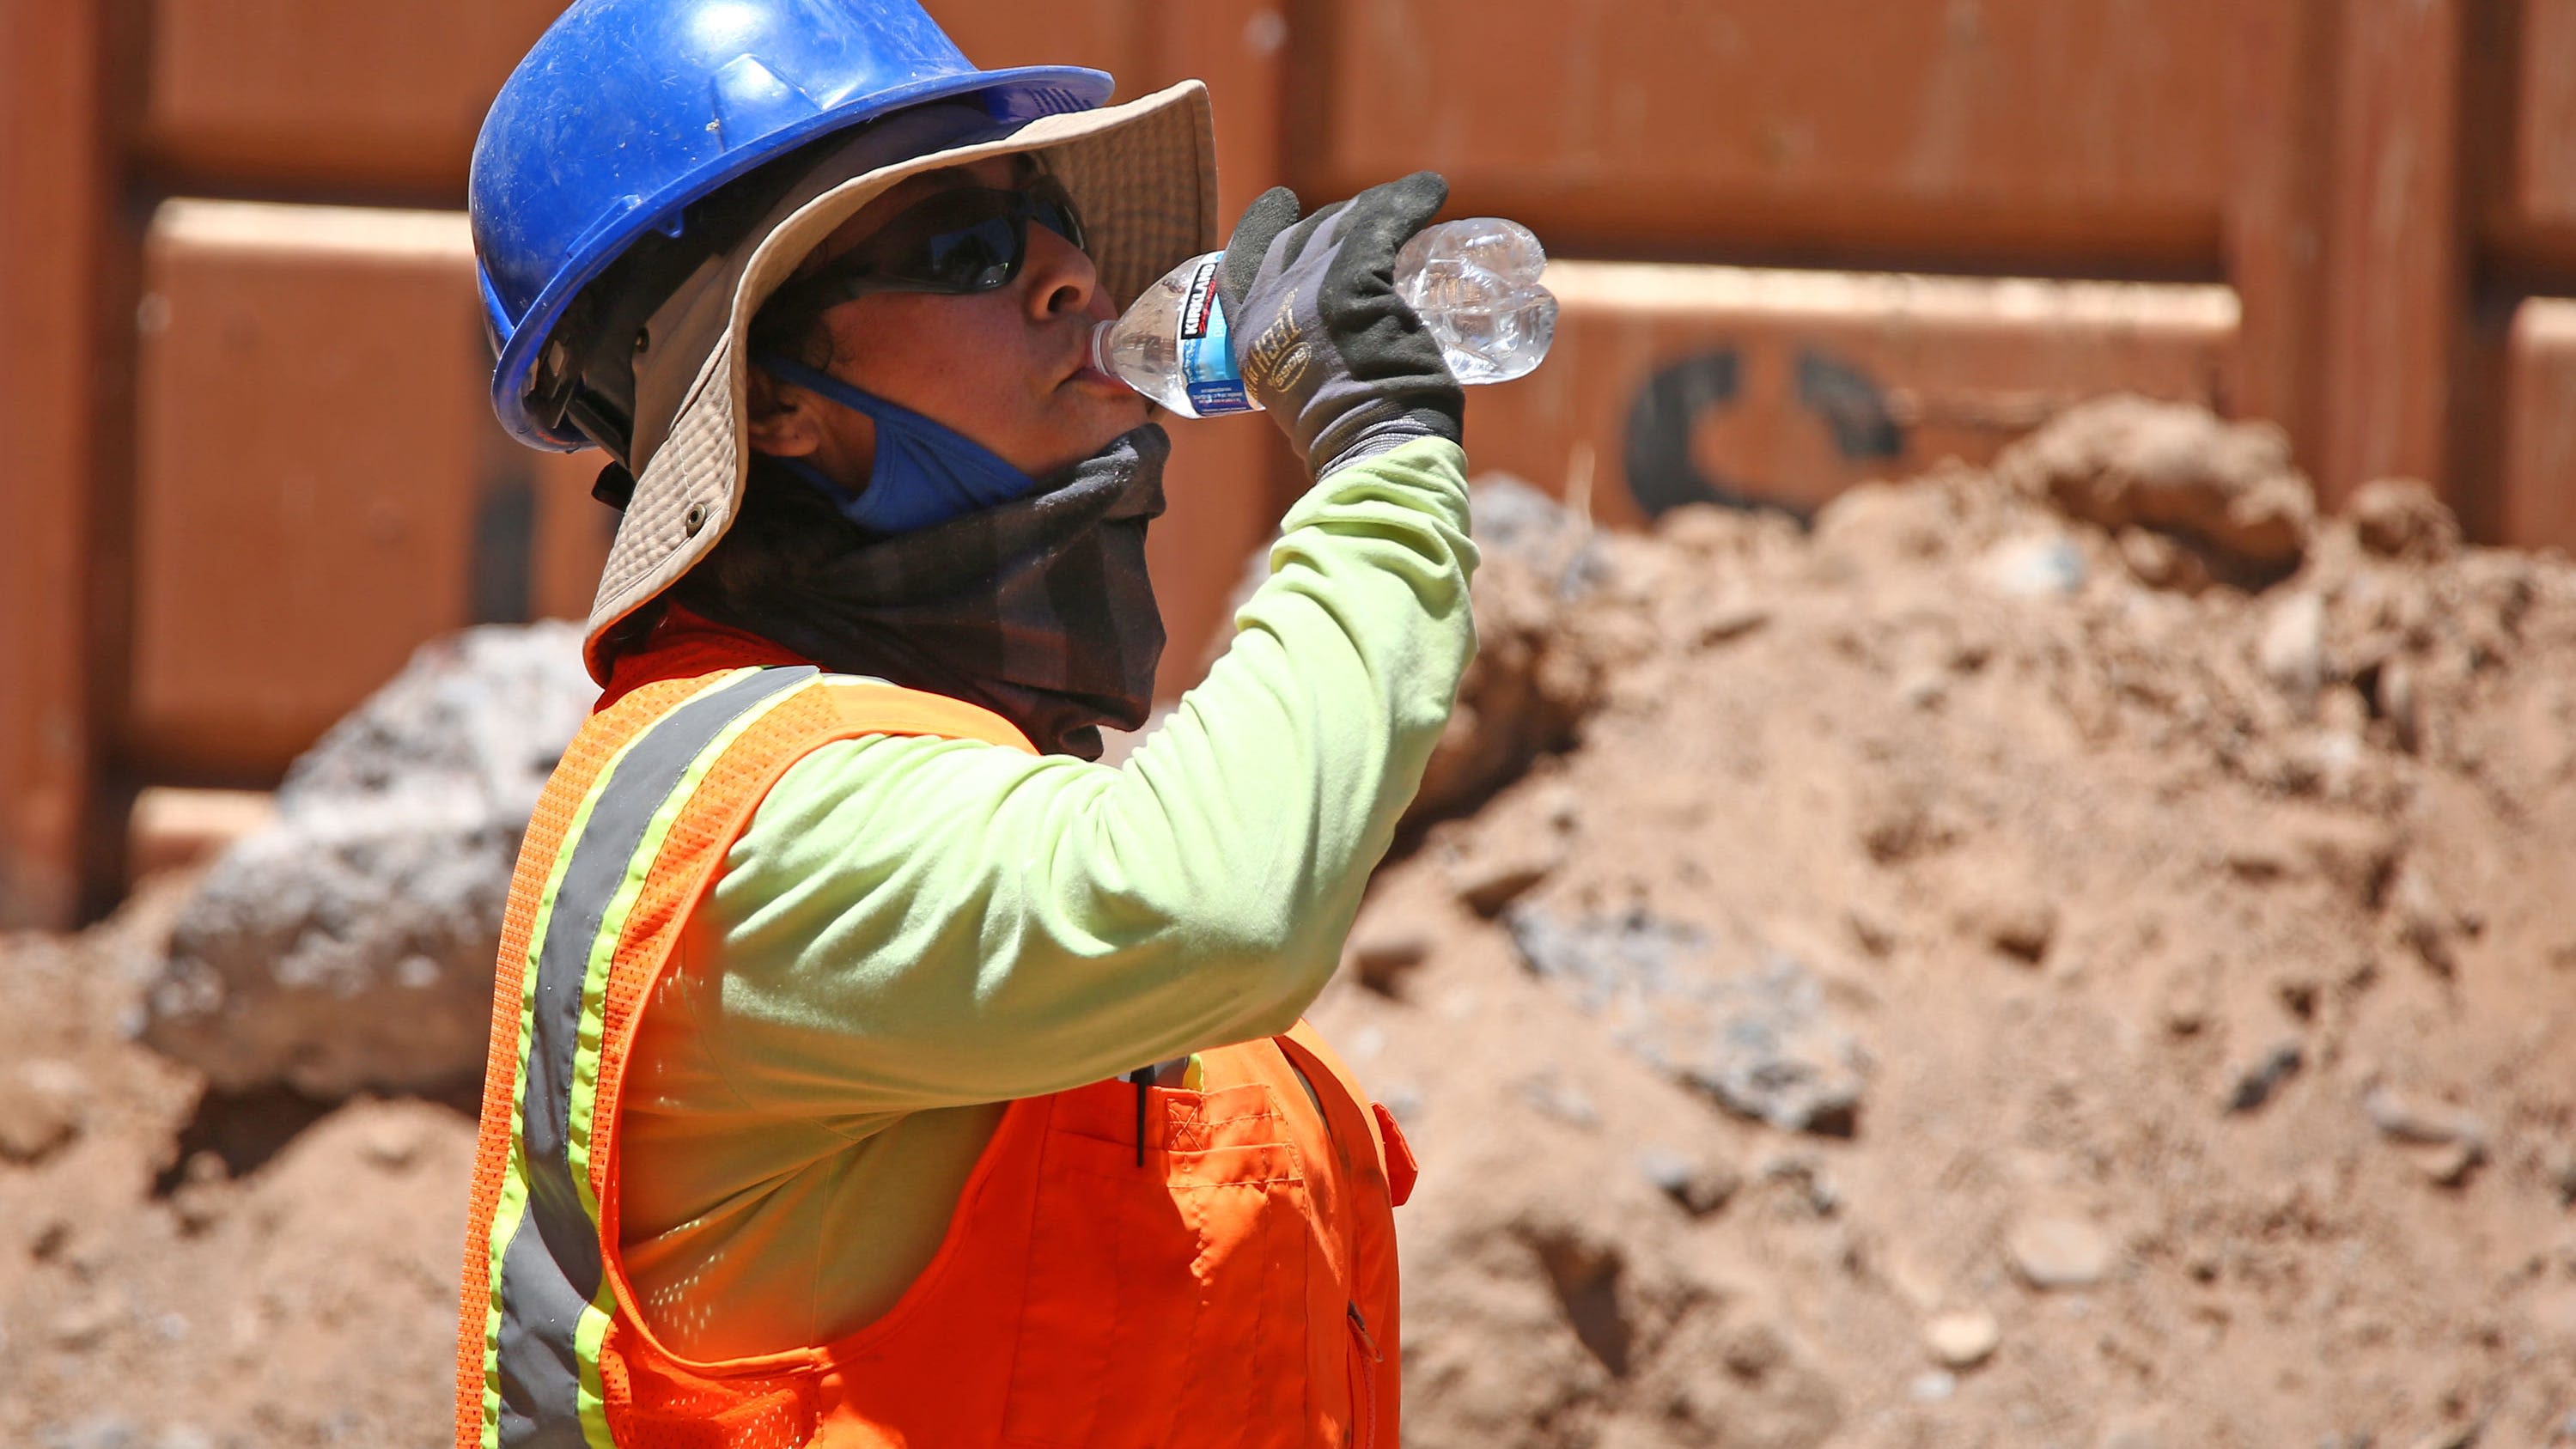 With no formal heat standards, Arizona's outdoor workers are at risk of illness and death